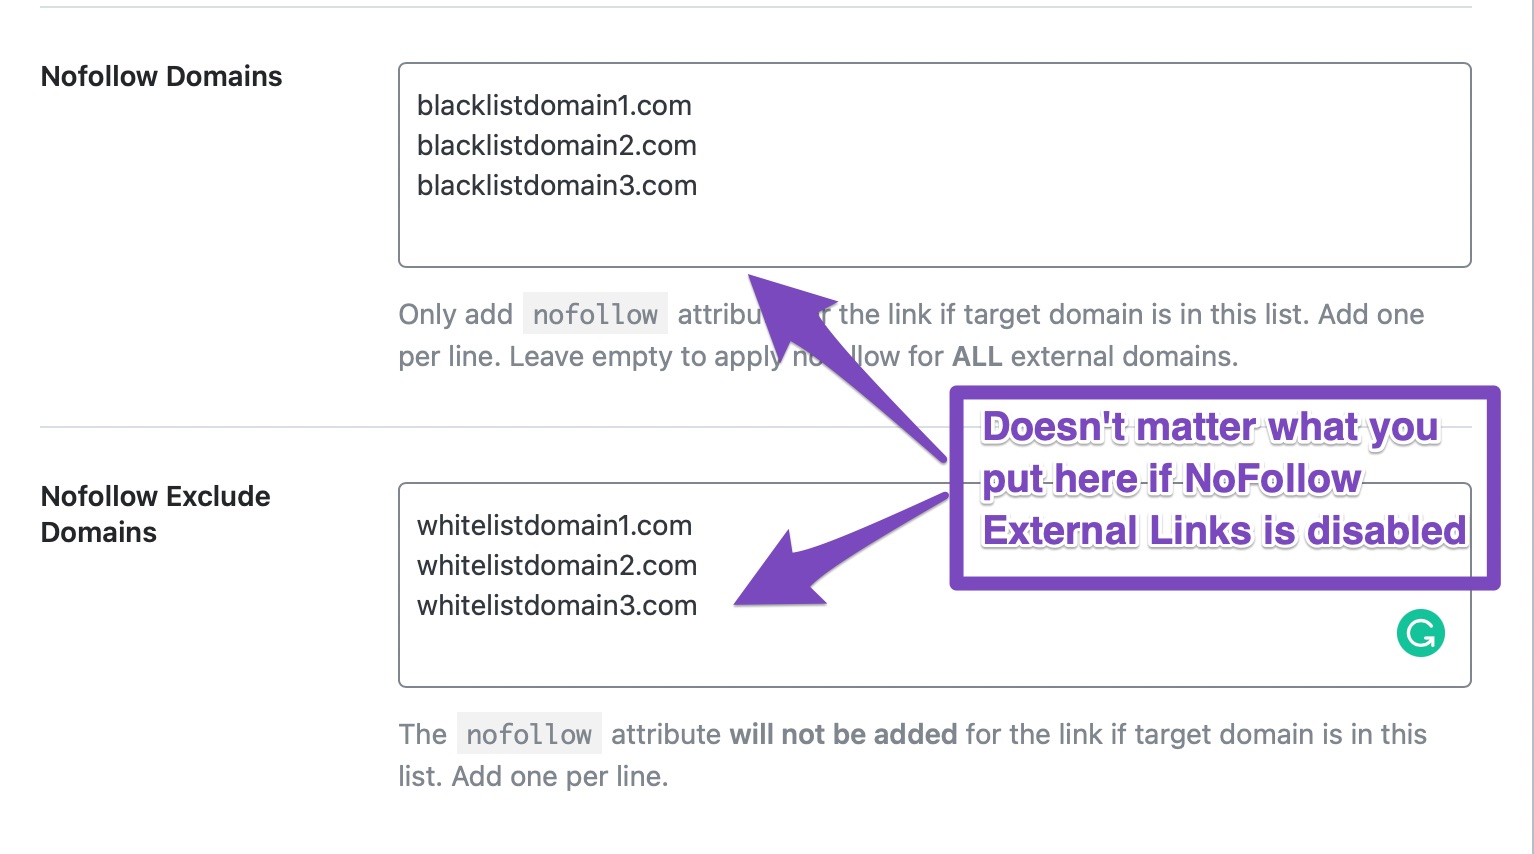 what happens if nofollow external links are off